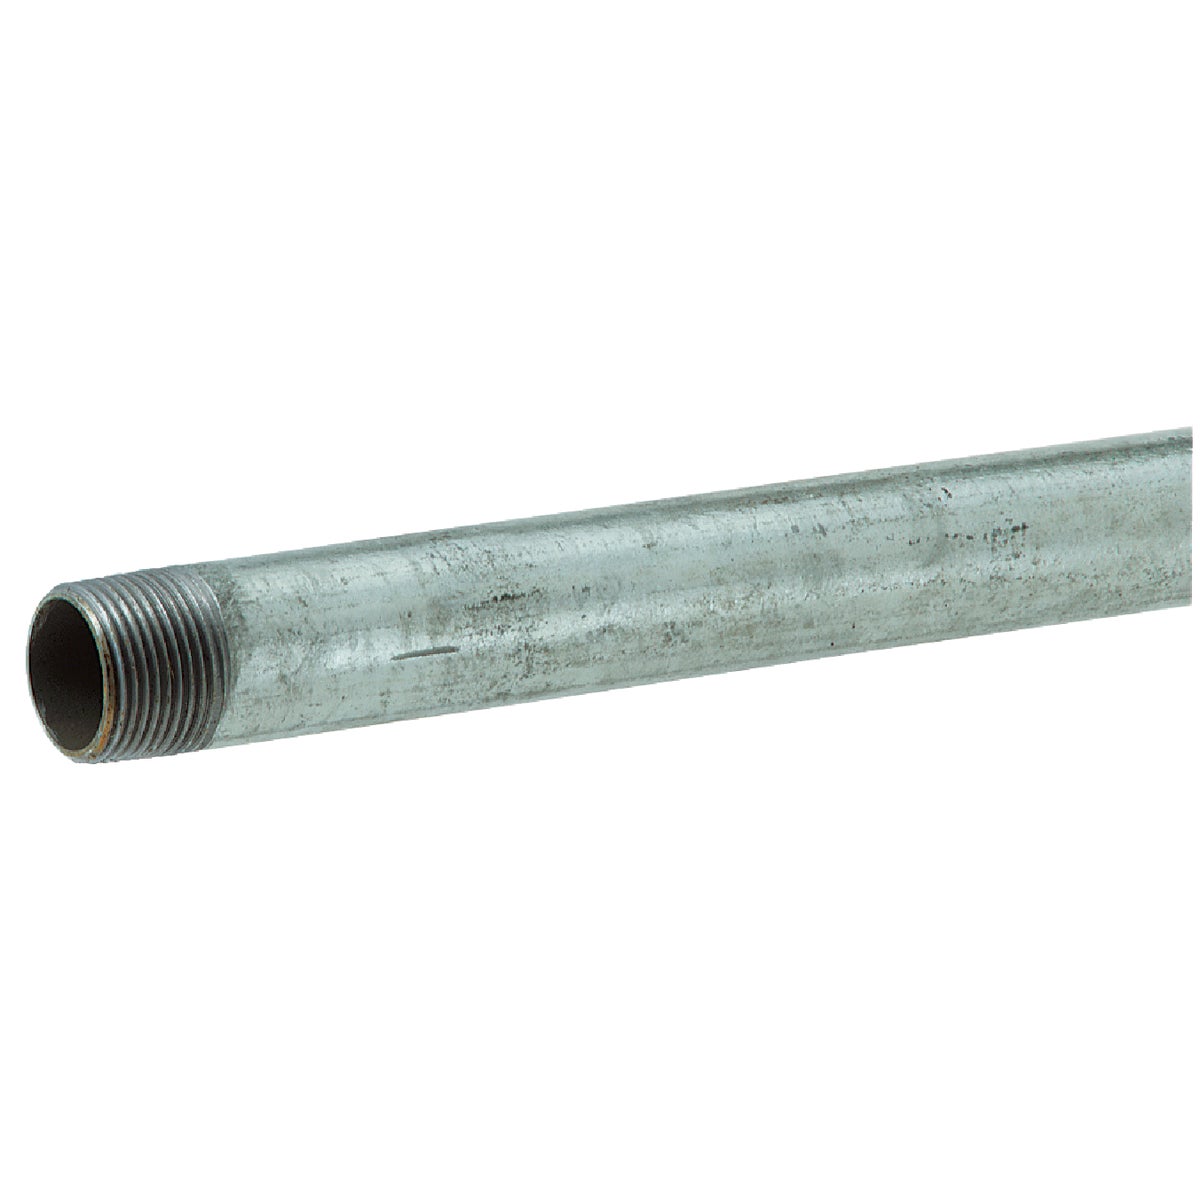 Southland 3/4 In. x 60 In. Carbon Steel Threaded Galvanized Pipe